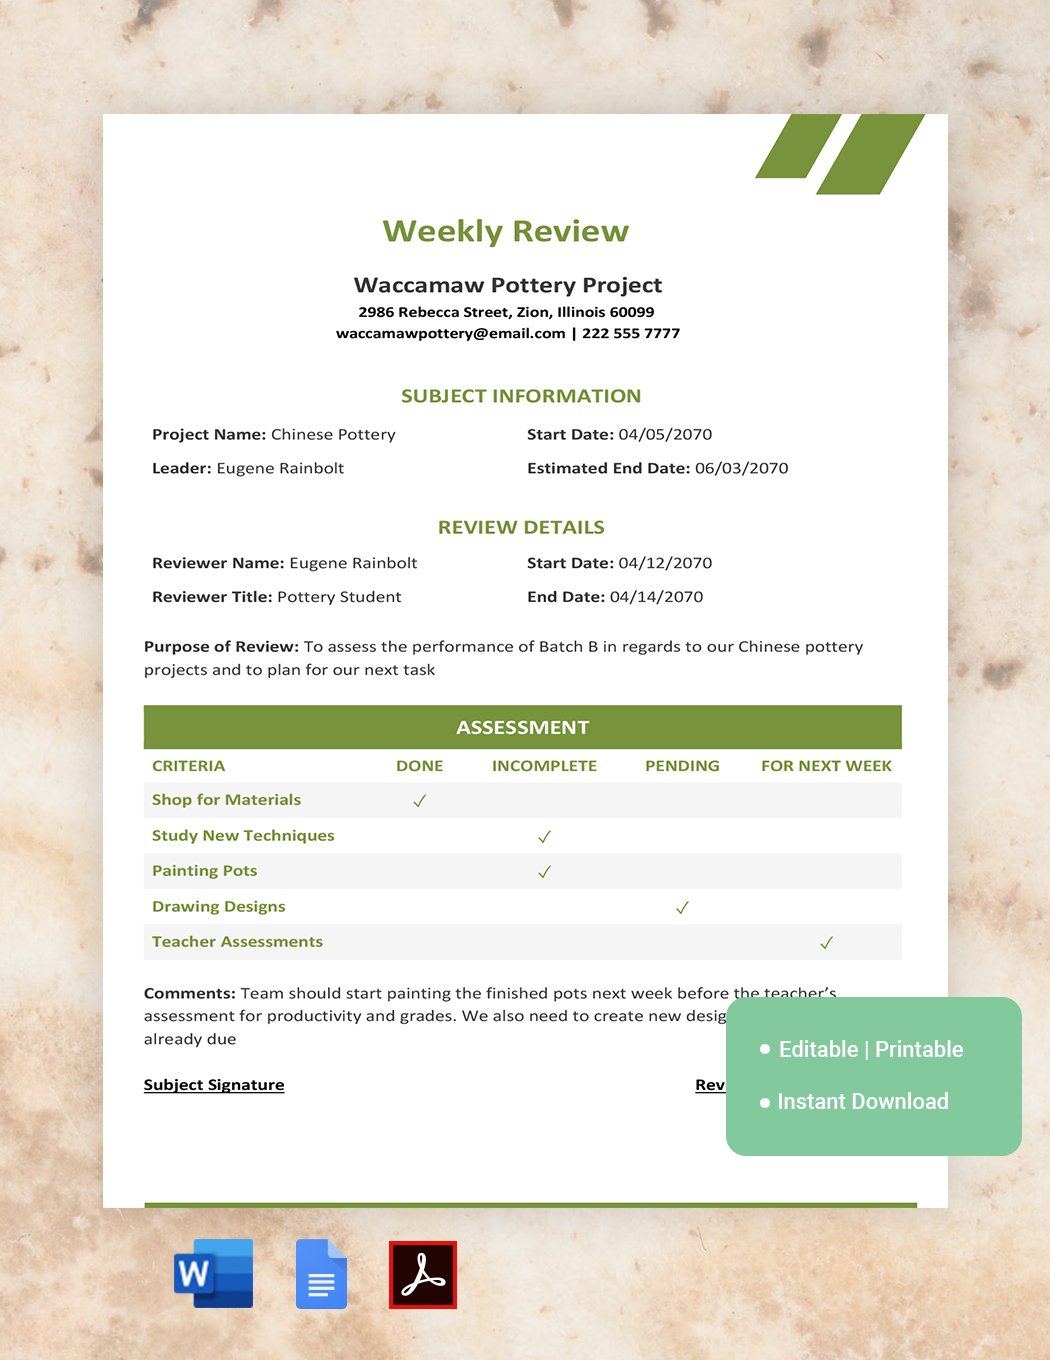 Weekly Review Template in Word, Google Docs